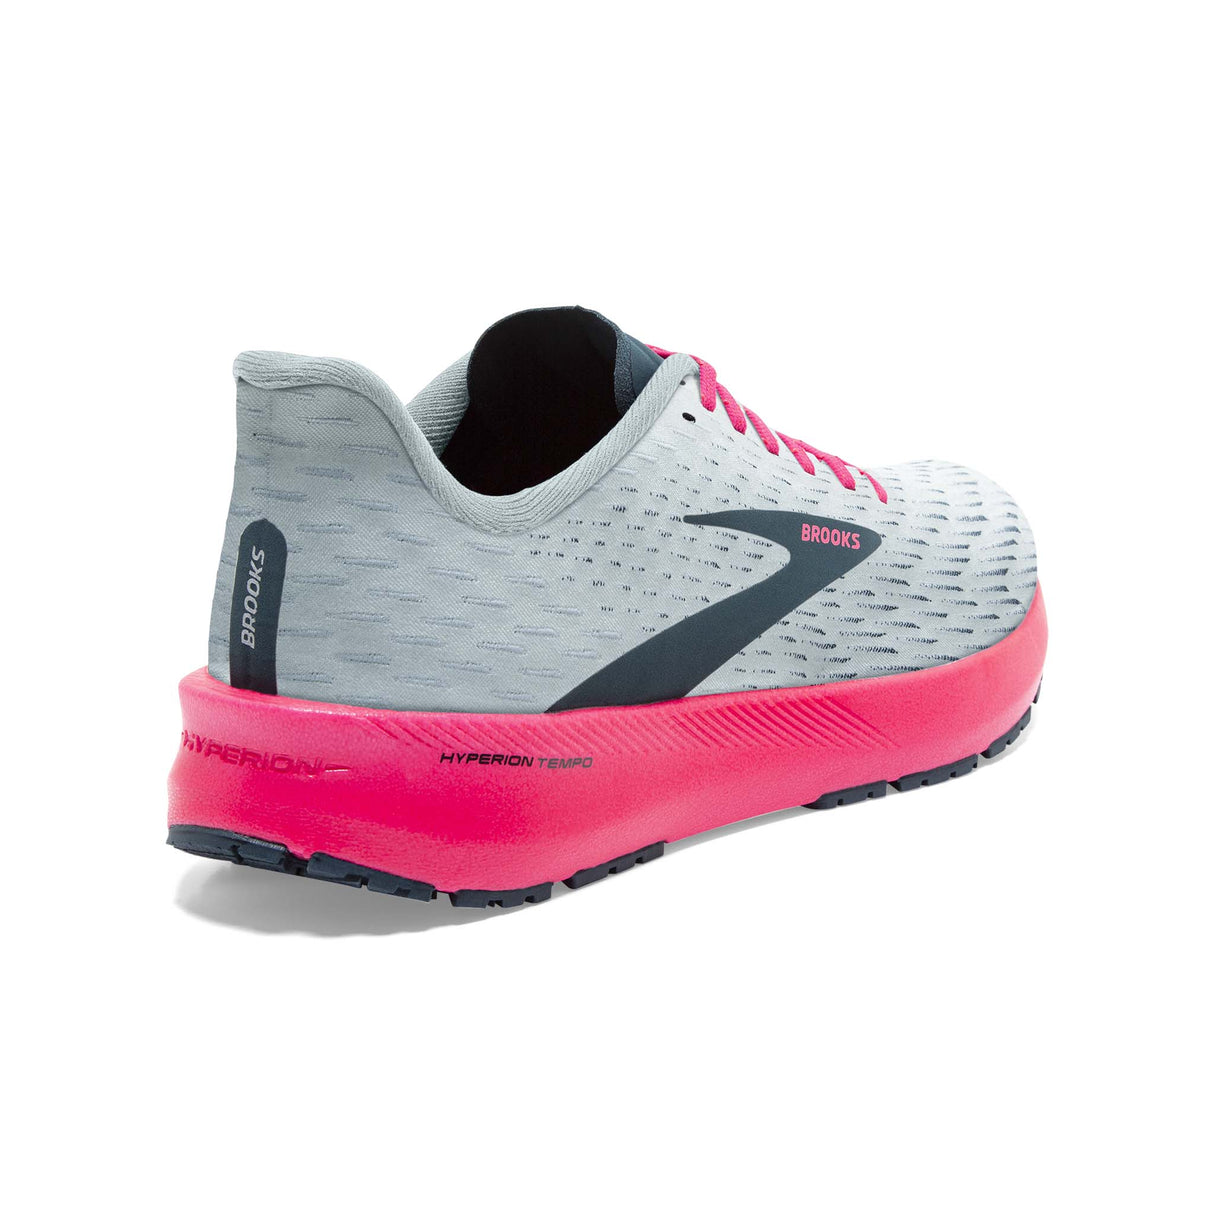 Brooks Hyperion Tempo running shoes for women